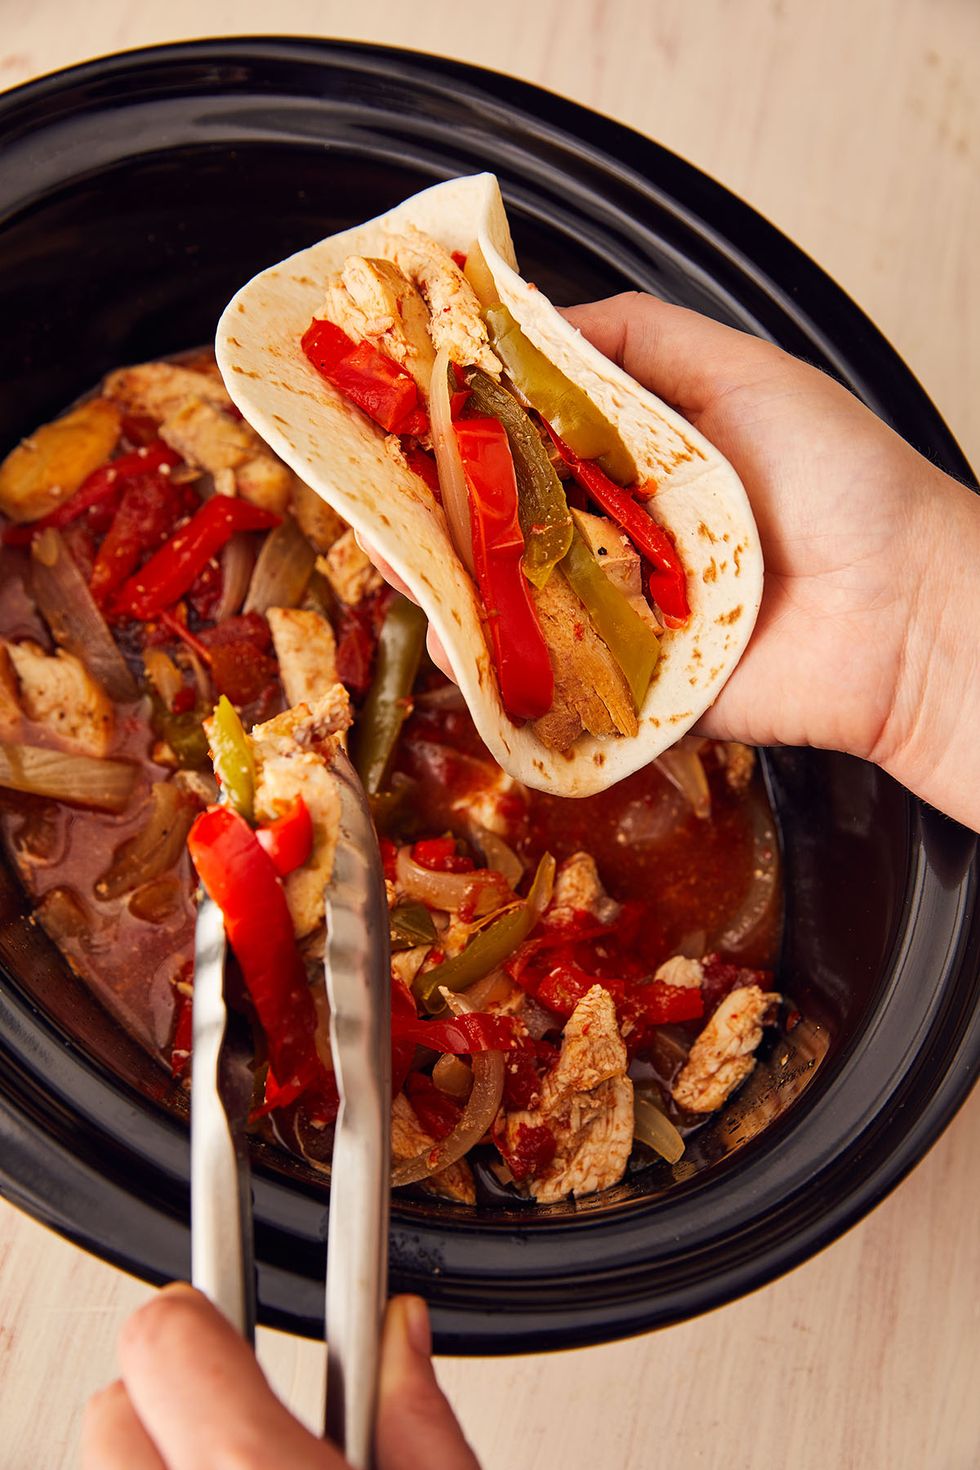 Easy Slow Cooker Dinner Recipes For A Single Guy